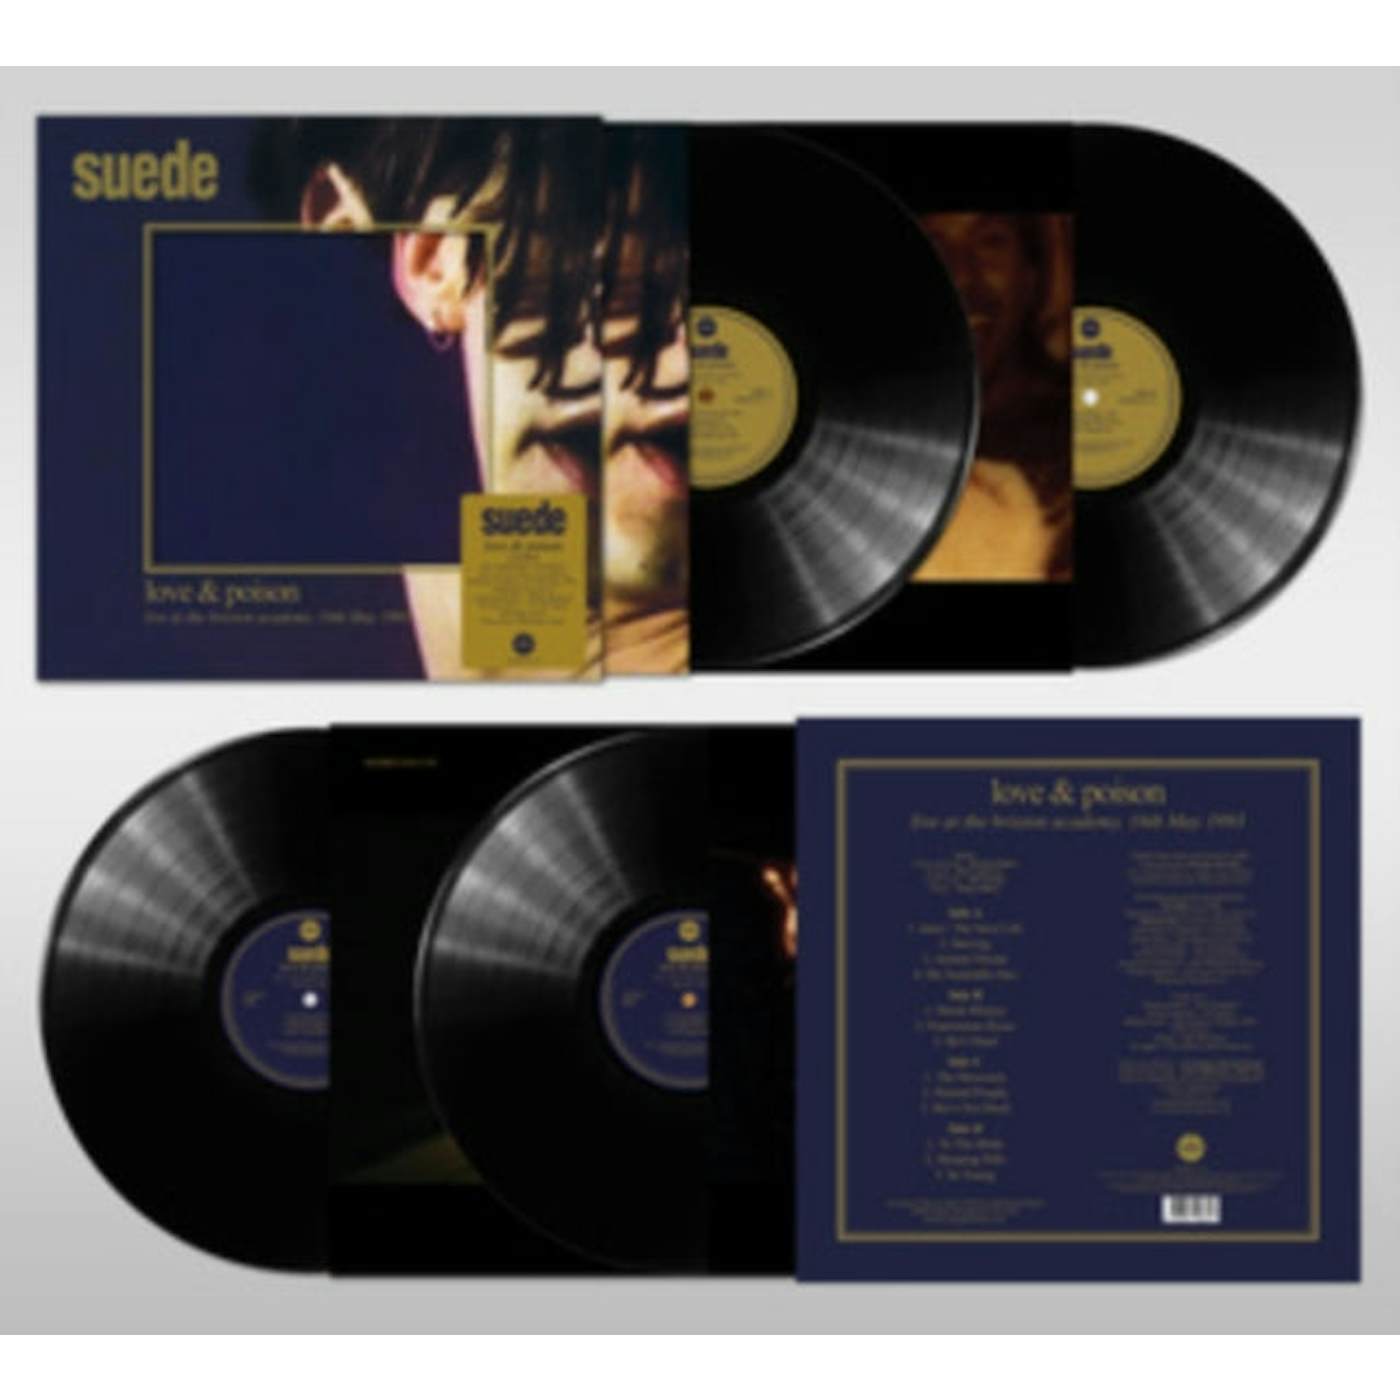 Suede LP Vinyl Record - Love And Poison